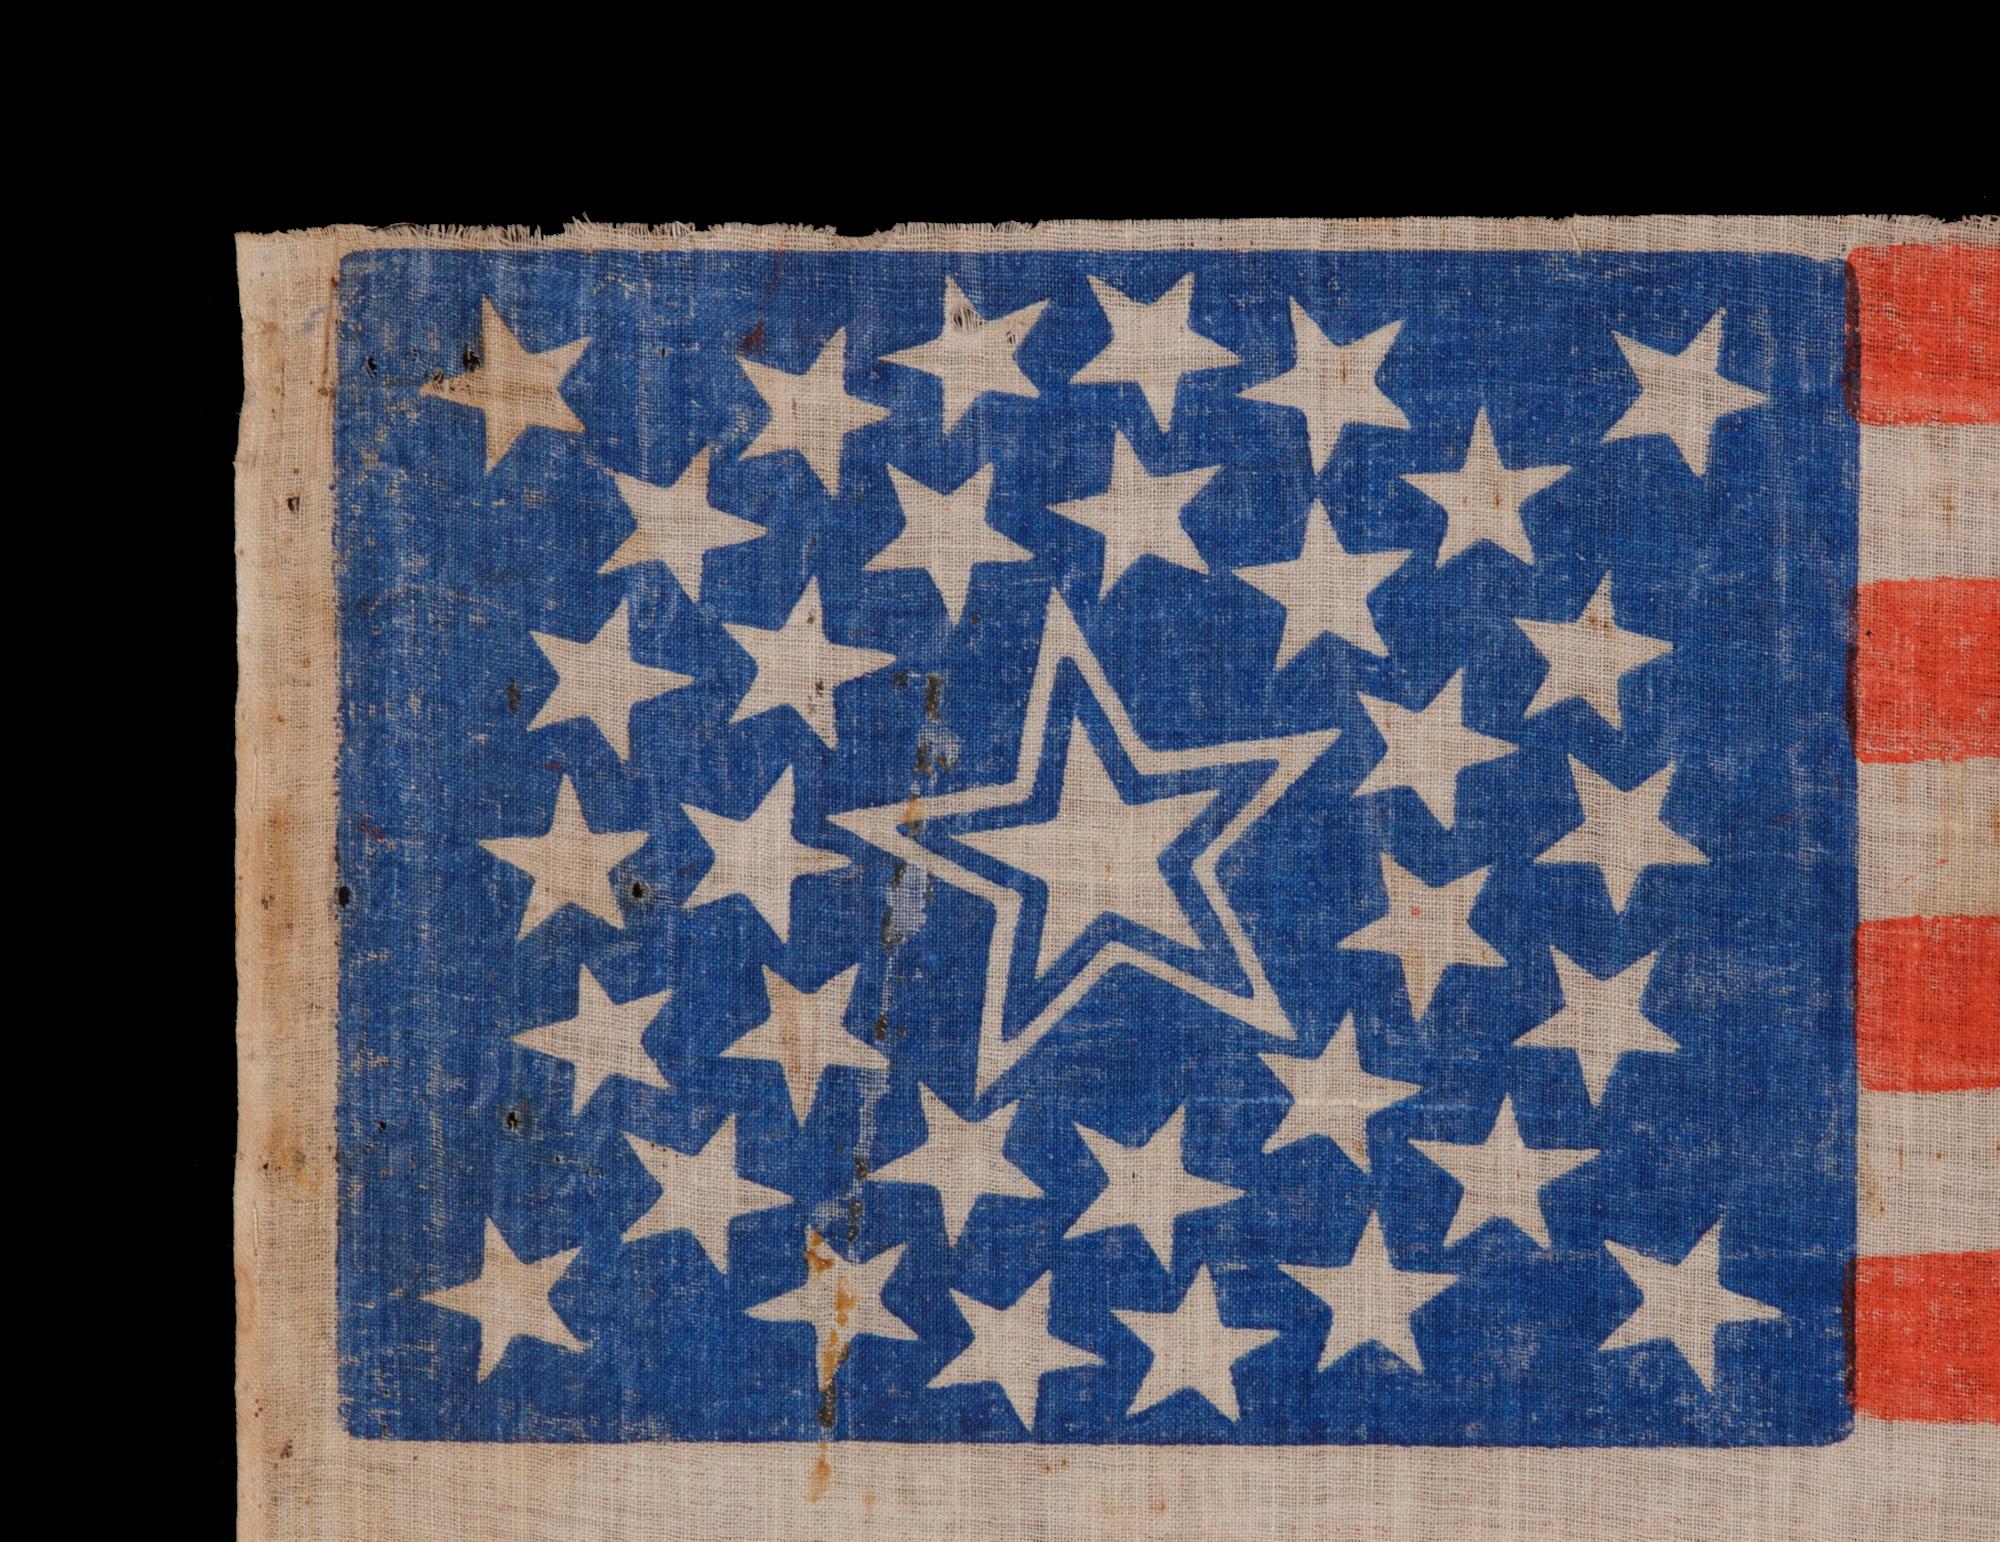 34 STARS IN A MEDALLION CONFIGURATION ON AN ANTIQUE AMERICAN PARADE FLAG WITH A LARGE, HALOED CENTER STAR; CIVIL WAR PERIOD, KANSAS STATEHOOD, 1861-1863

34 star American national parade flag, printed on cotton and bearing a beautiful medallion